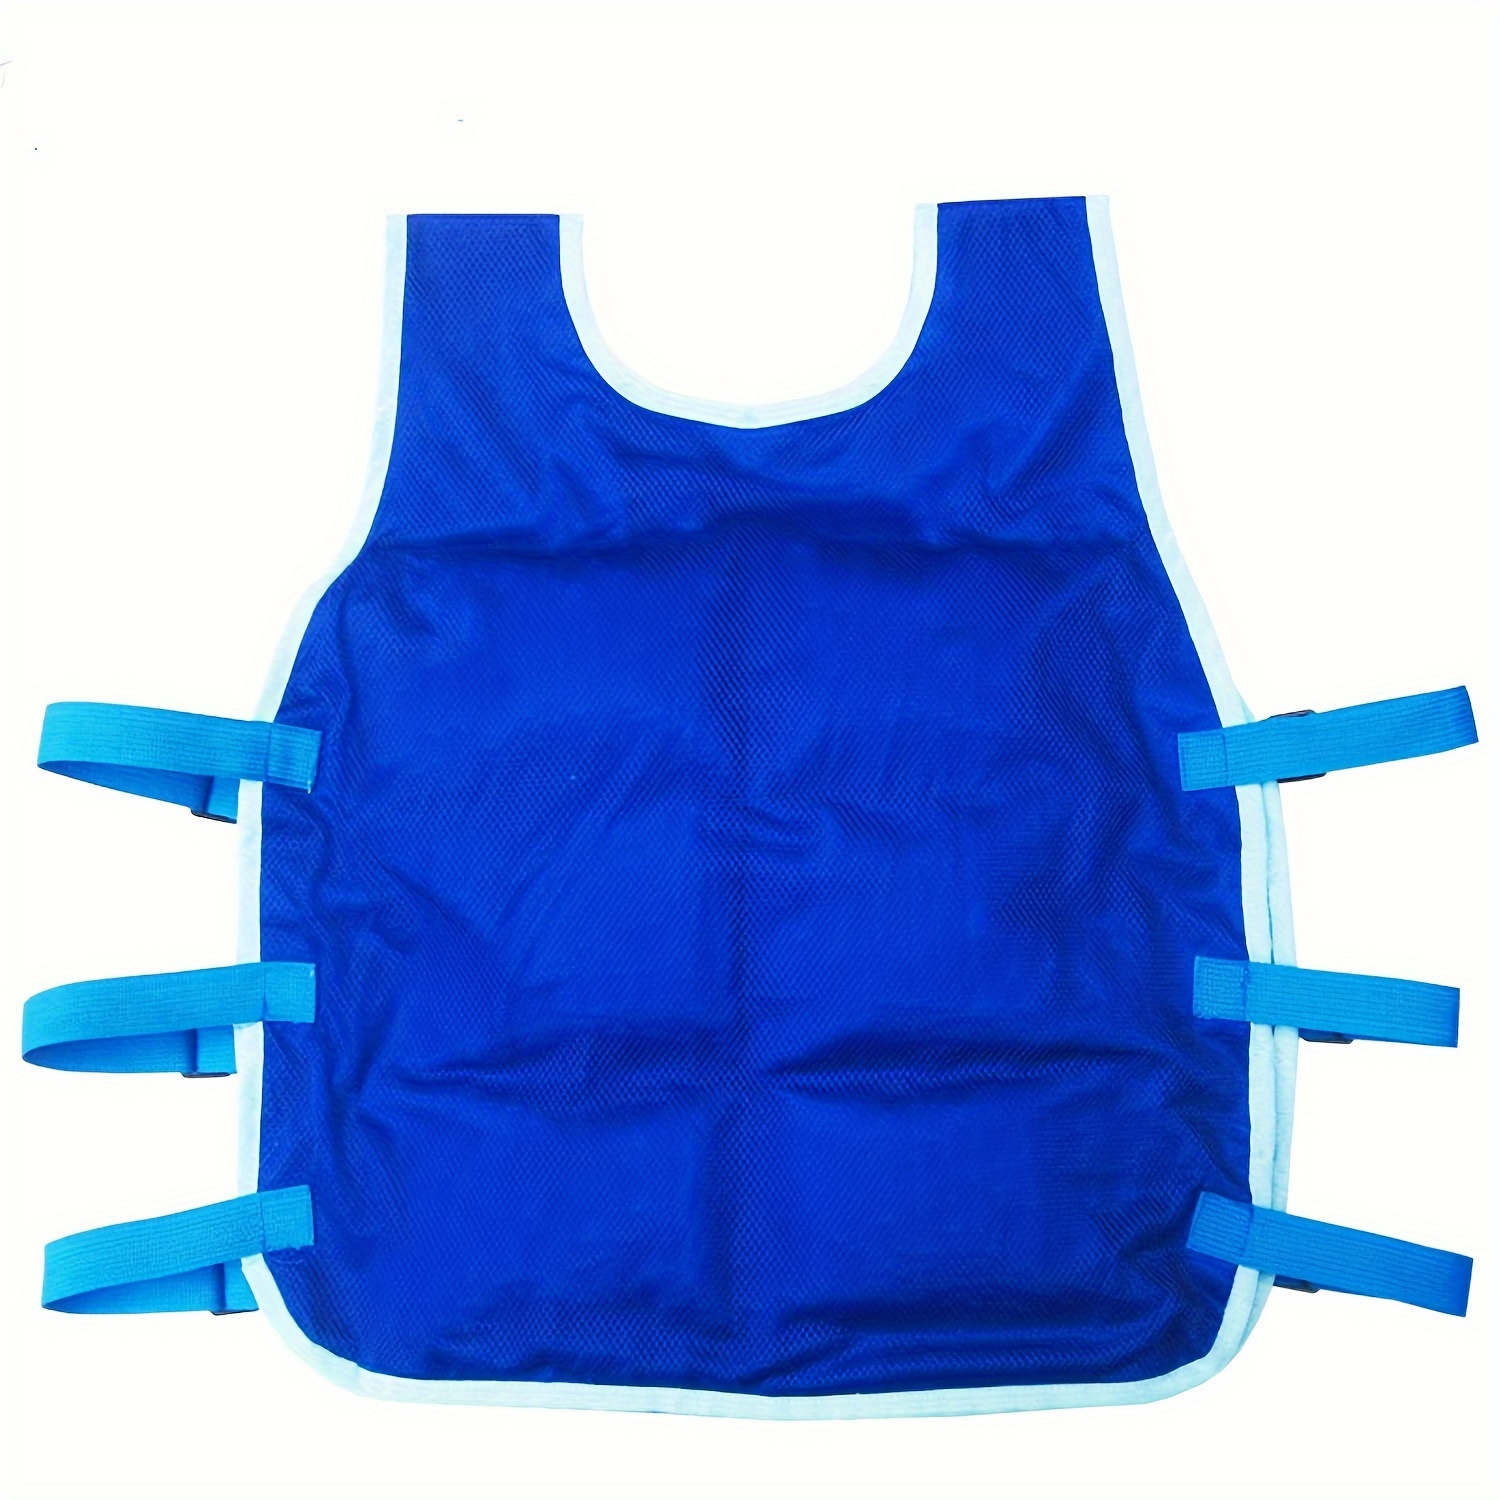 

Summer Cooling Vest For Men And Women: Ice Cooling Vest With 12 Ice Packs, Reusable Adjustable Riding Cold Vest, Suitable For Fishing, Cycling, Running, Cooking, Gardening, Outdoor Work In Hot Weather